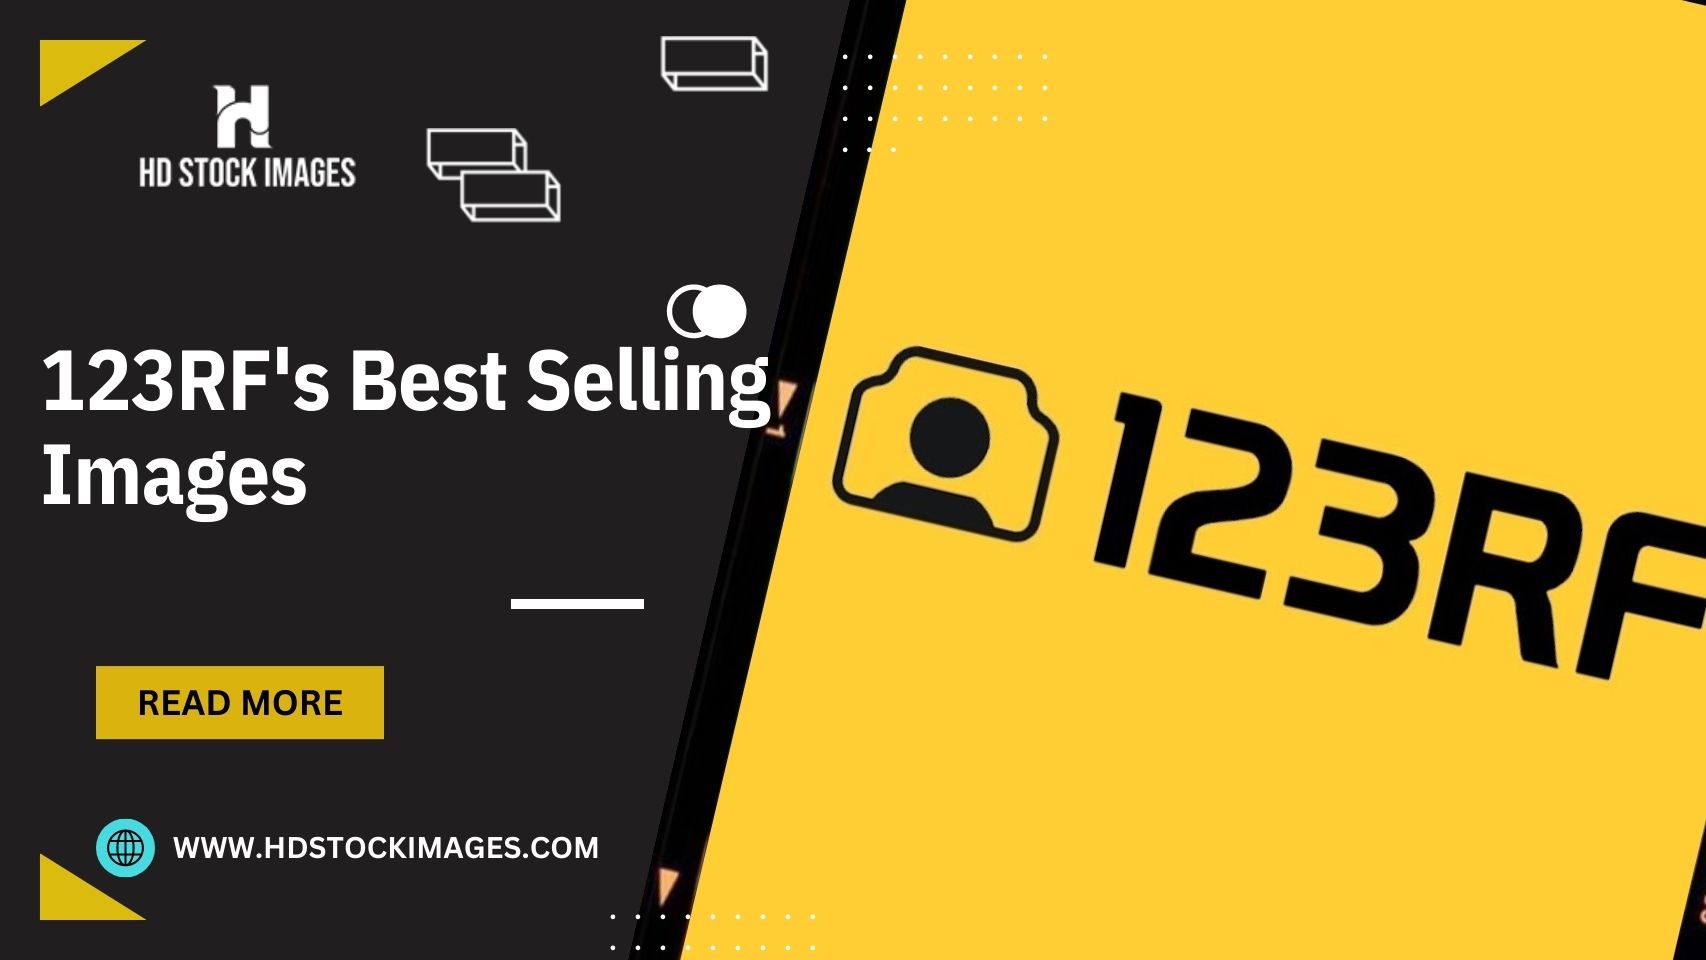 Insights into Popular and Profitable Content: 123RF's Best Selling Images